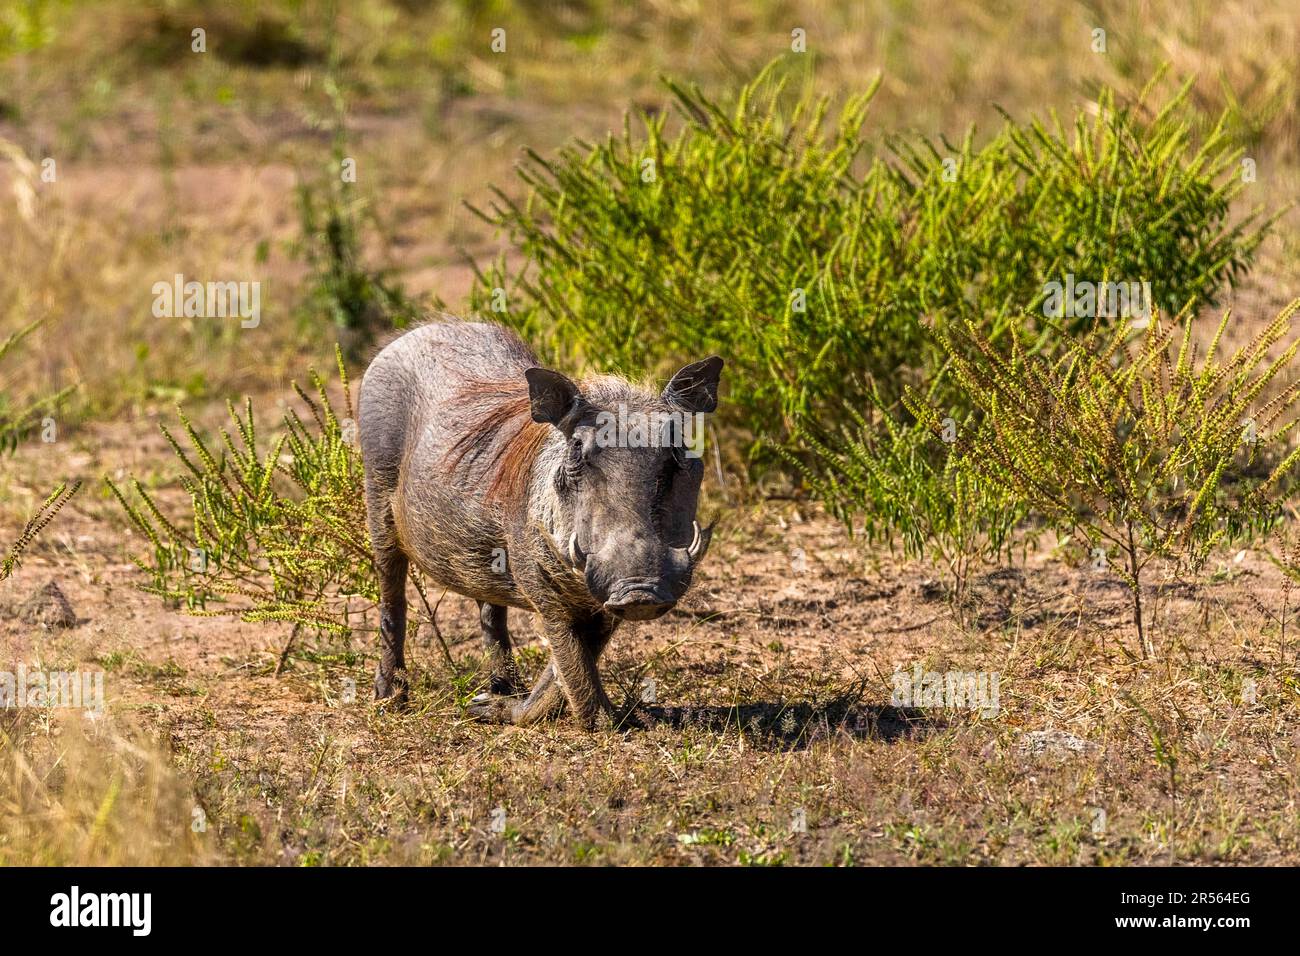 Warthog in Liwonde National Park, Malawi. Famous from movies and television. Pumbaa the warthog from Walt Disney film adaptations seems to curtsy to the park visitors Stock Photo